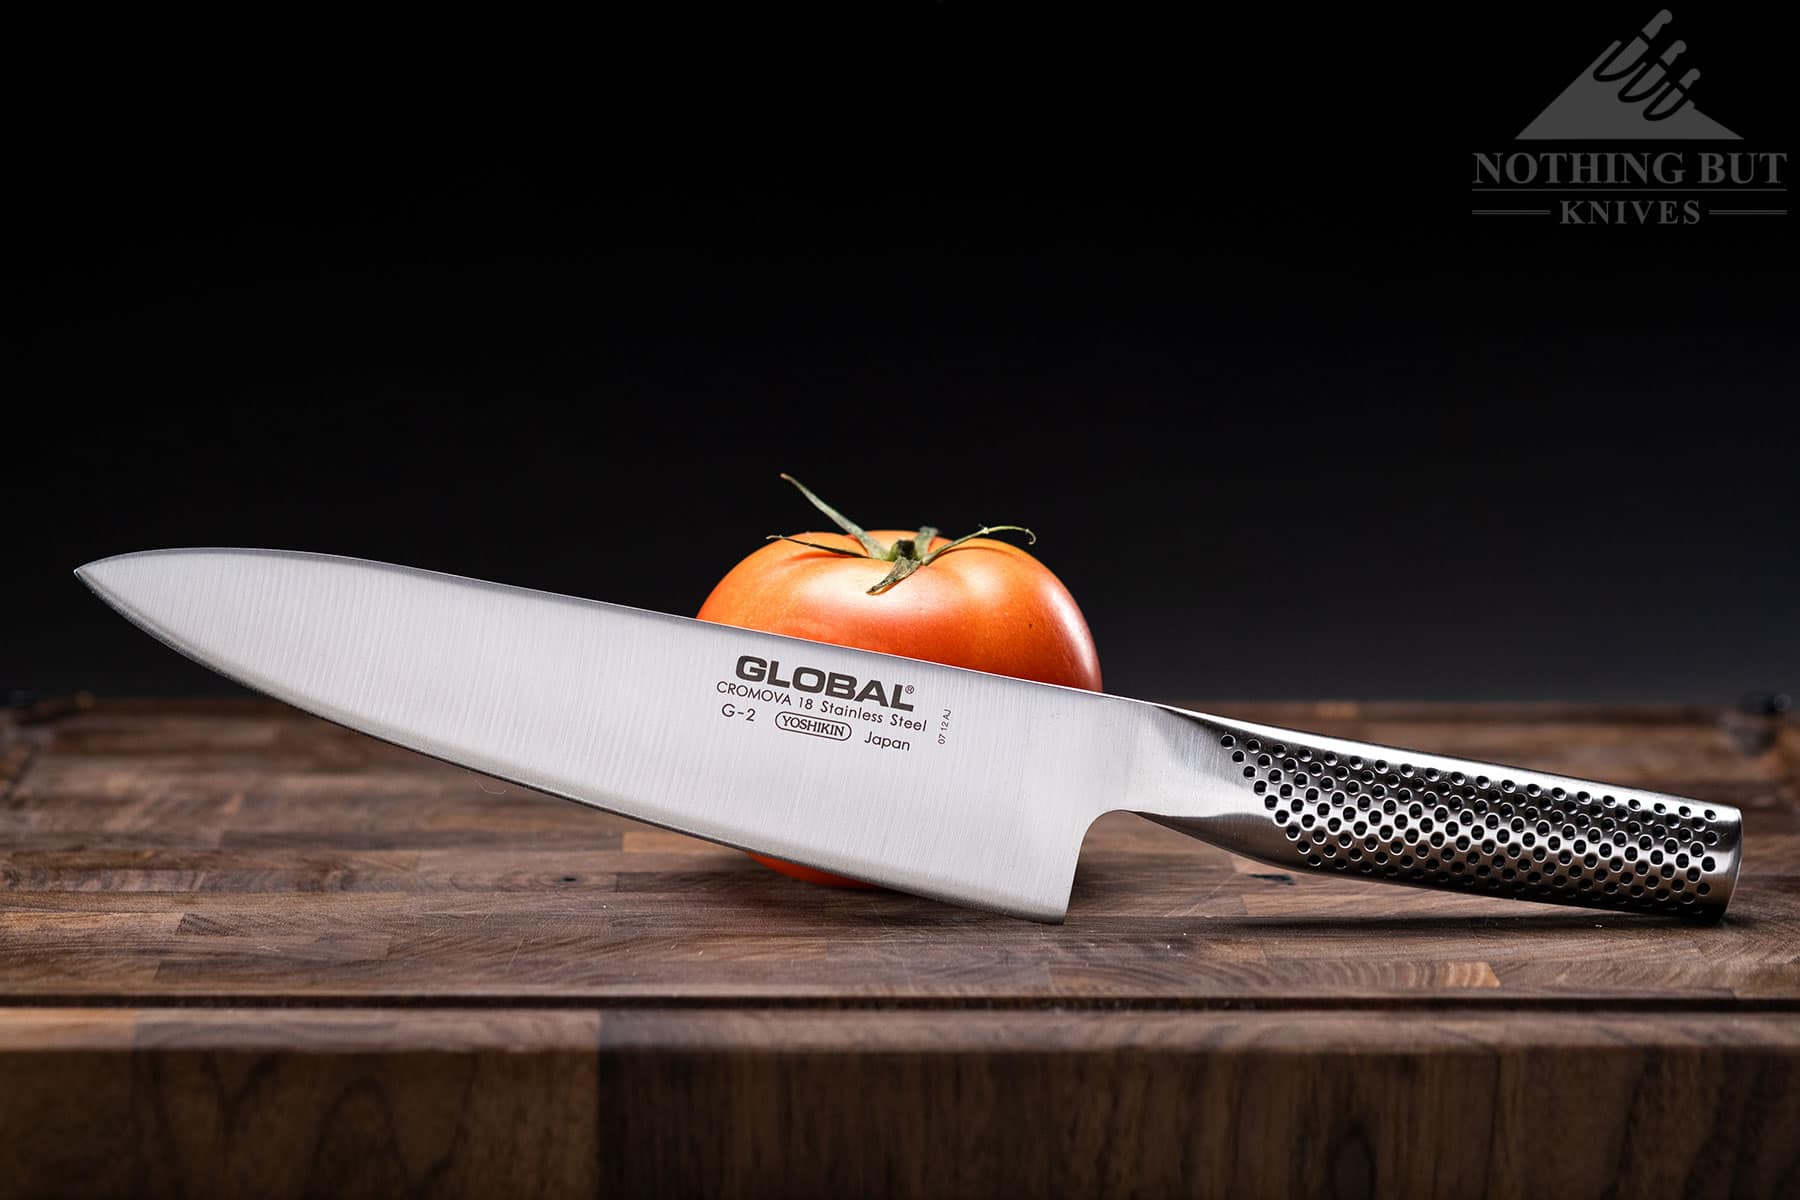 Sow Glorious Blive opmærksom Global G-2 8 Inch Chef's Knife Review | Nothing But Knives